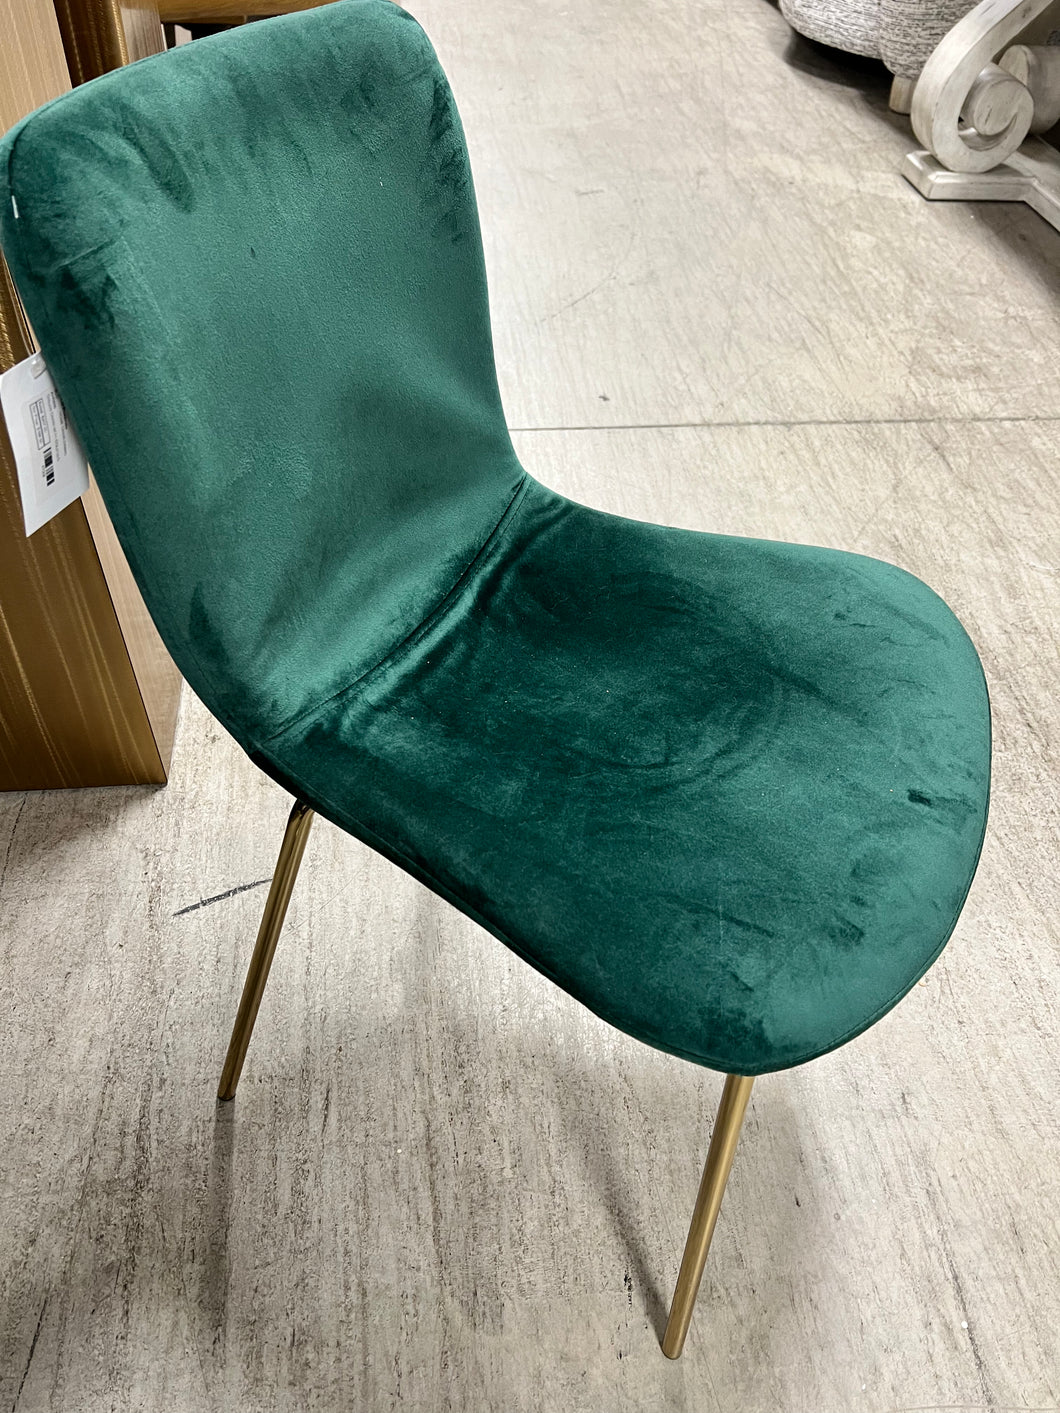 GREEN CHAIR WITH GOLD LEGS